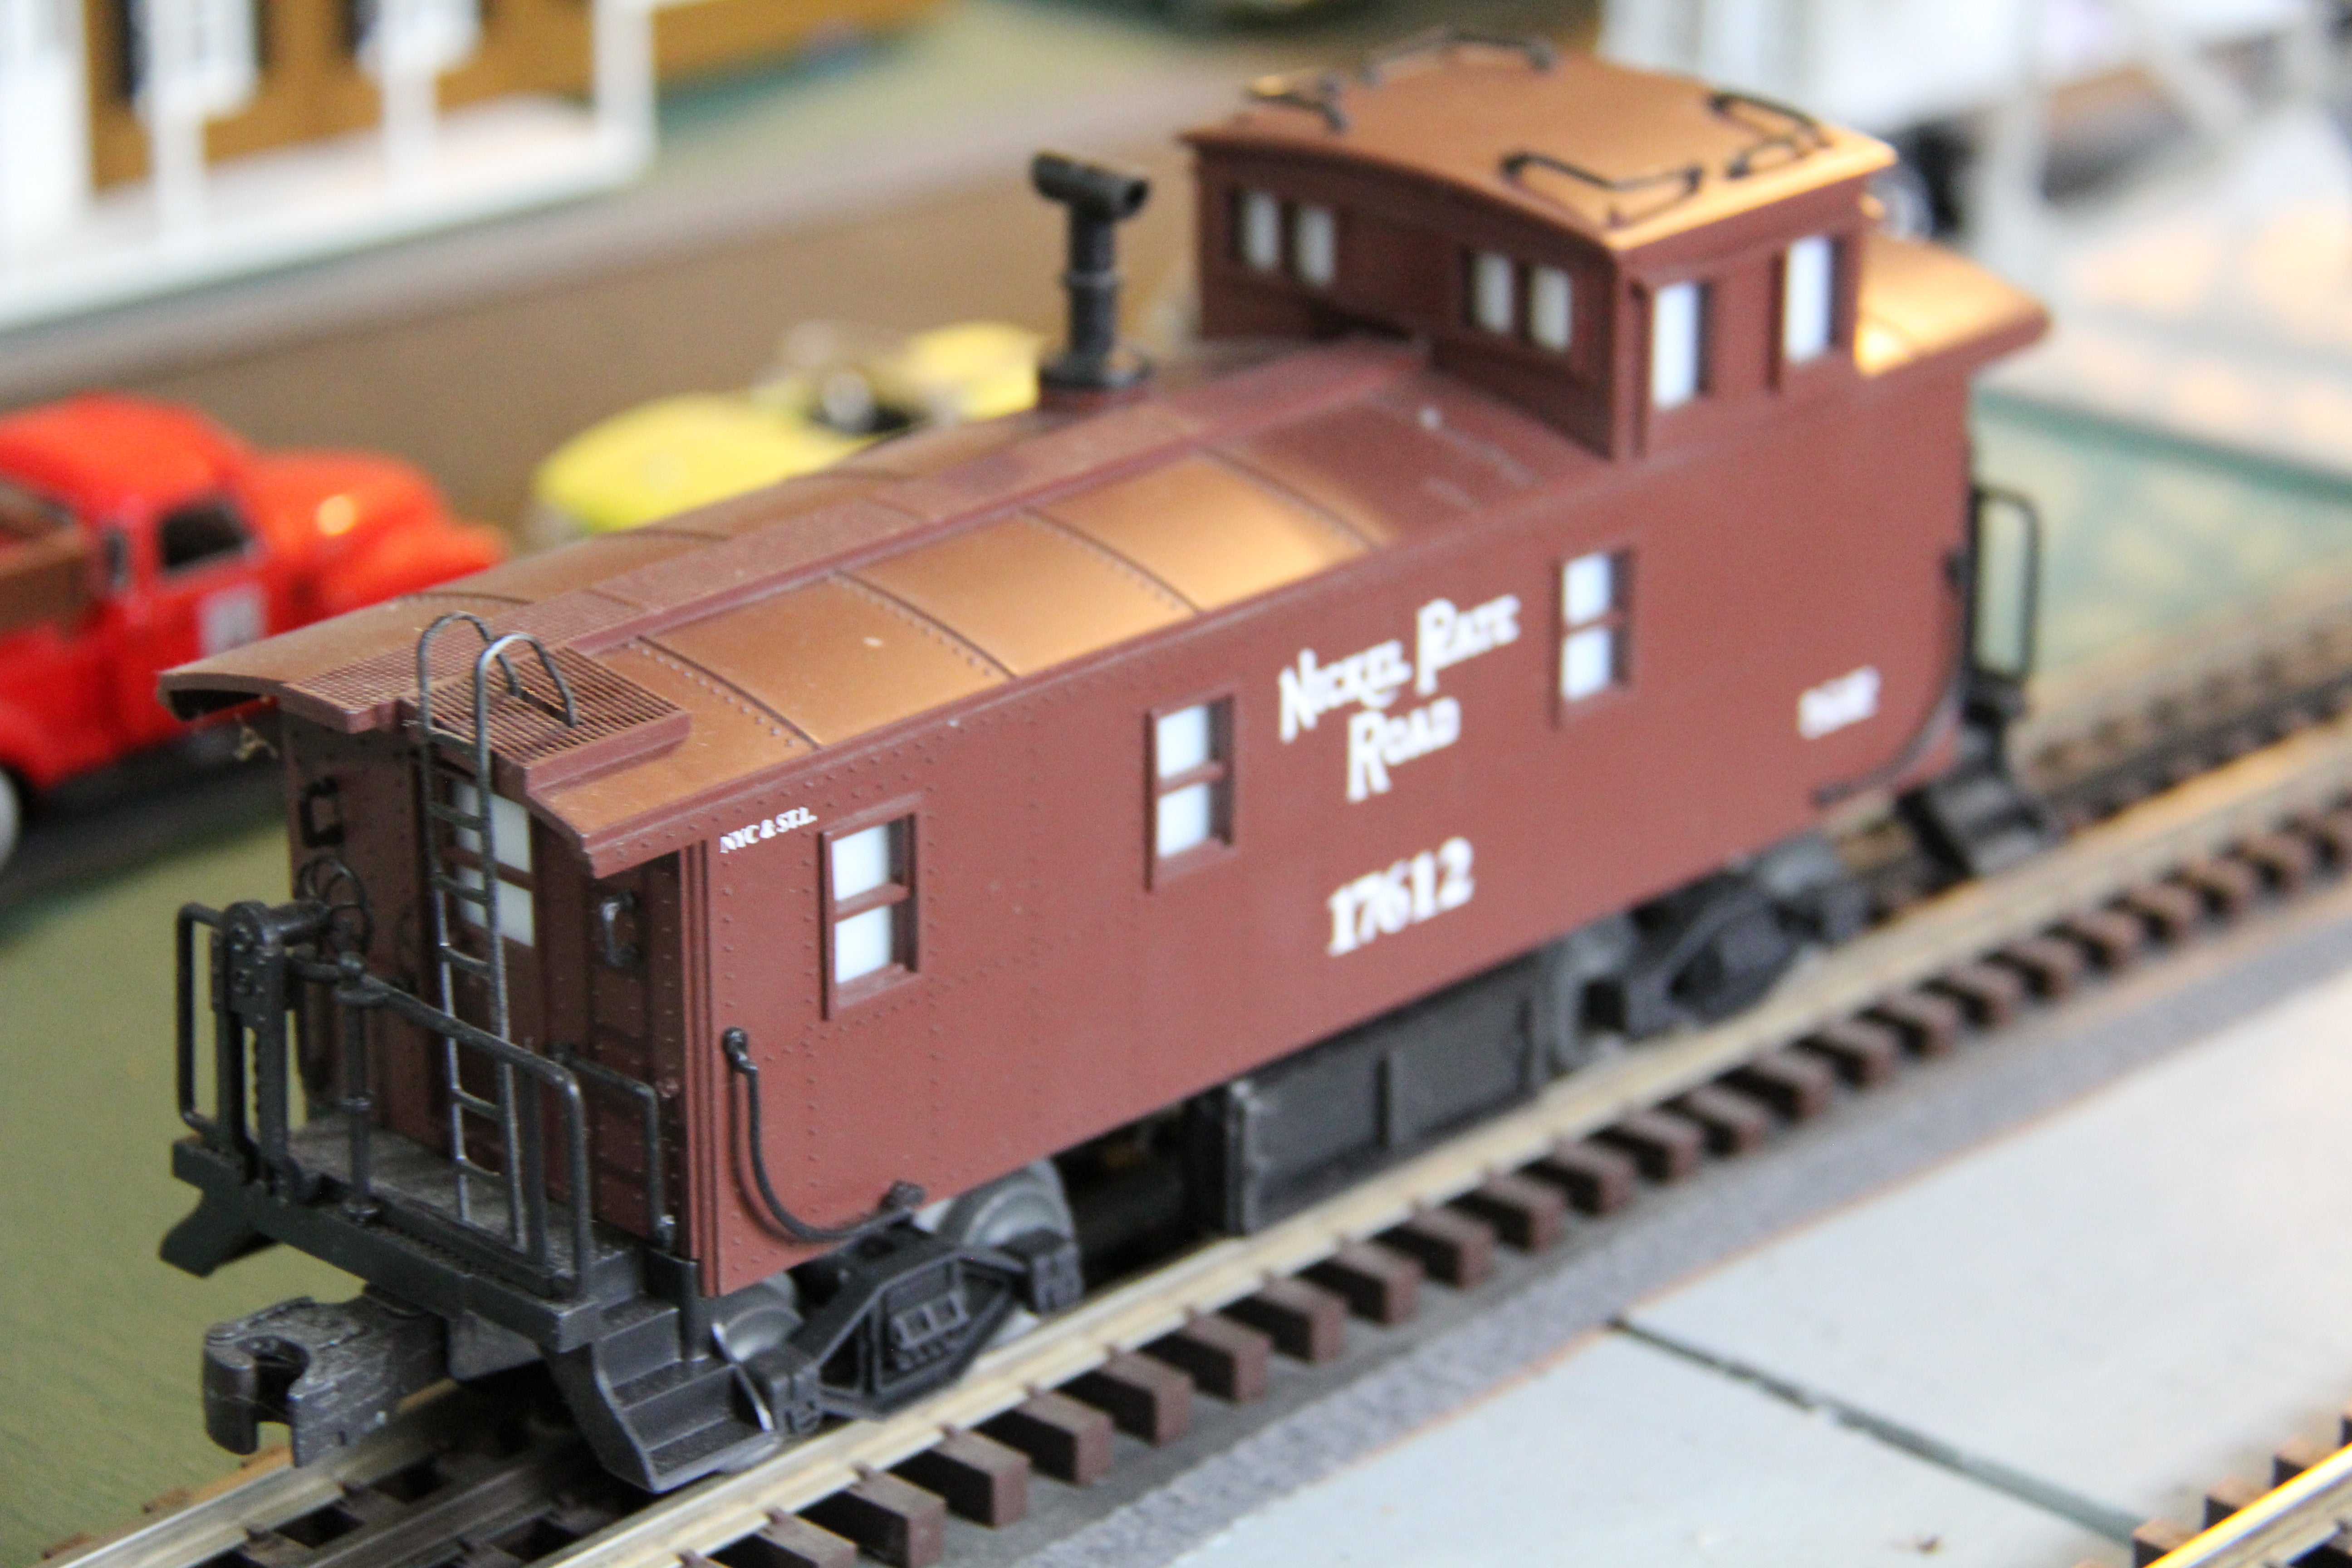 Lionel 6-17612 Nickel Plate Road Caboose-Second hand-M4267